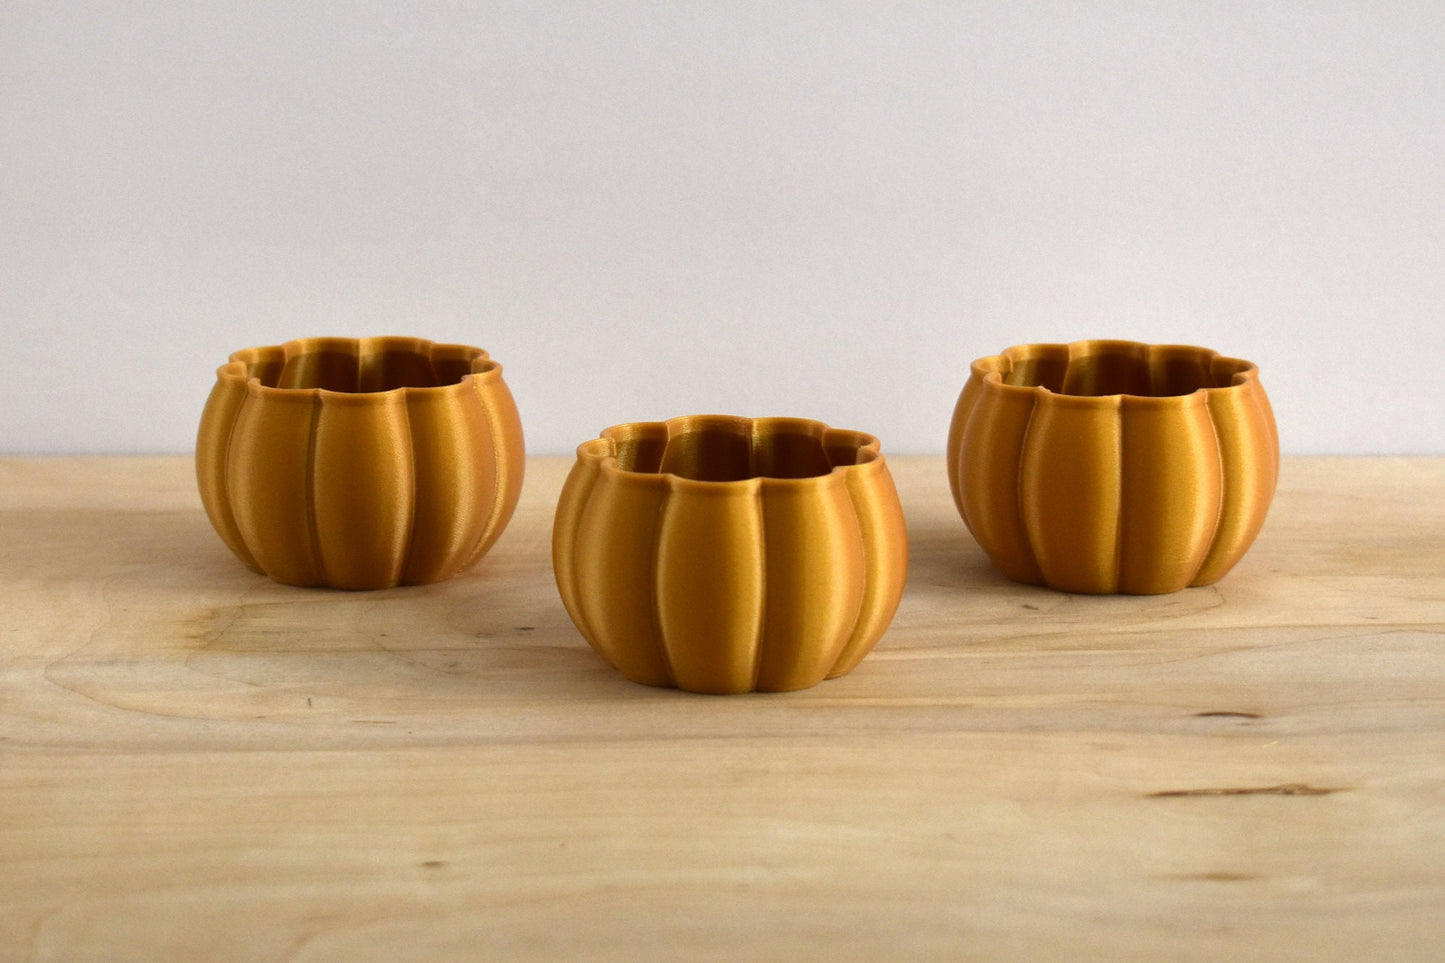 Set of 3 Mini Pumpkin Planters, Indoor or Outdoor For Weddings, Baby Showers, and Fall Events